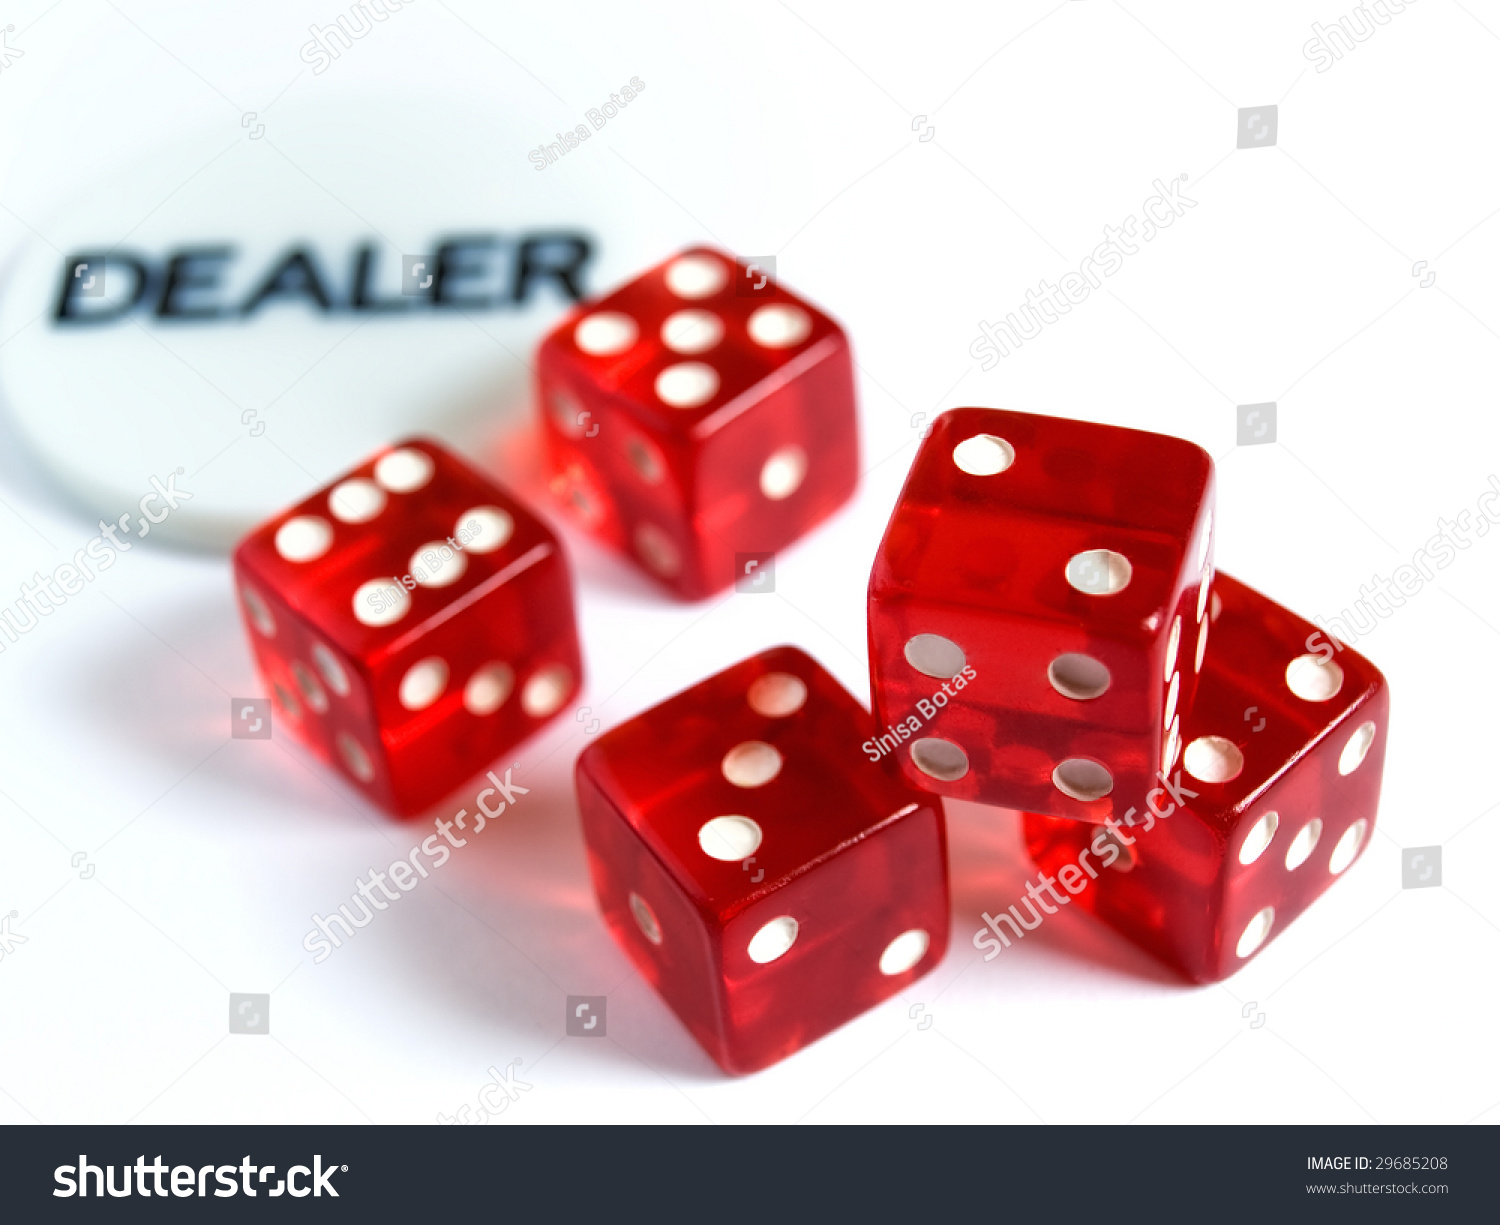 Conceptual image represent occupations or career in gambling or risk in  investment world. #29685208